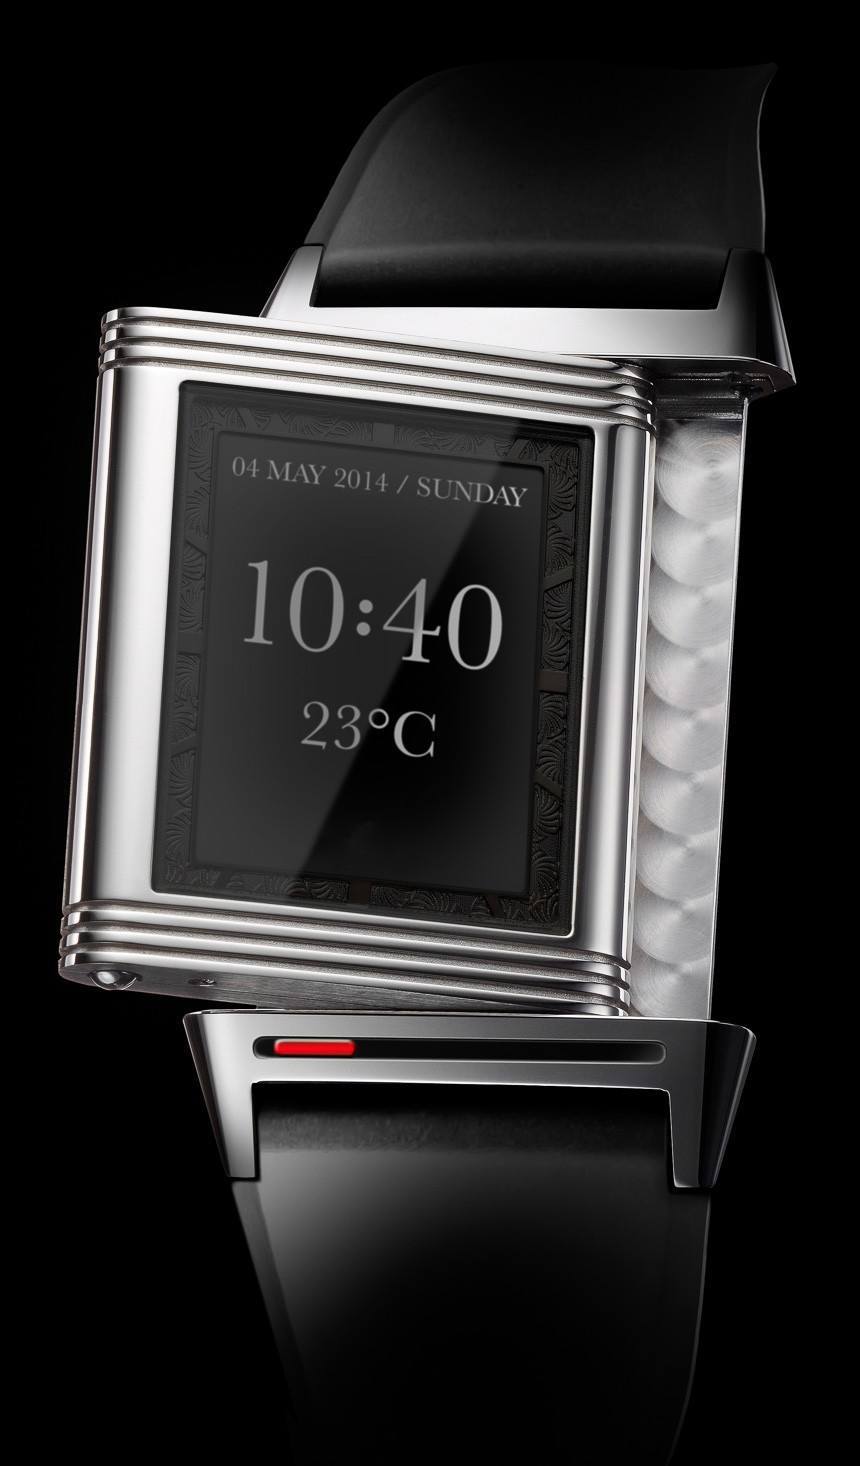 seinpaal conjunctie Kamer 3 Concept Smartwatches That Could Be From Popular Swiss Luxury Brands |  aBlogtoWatch